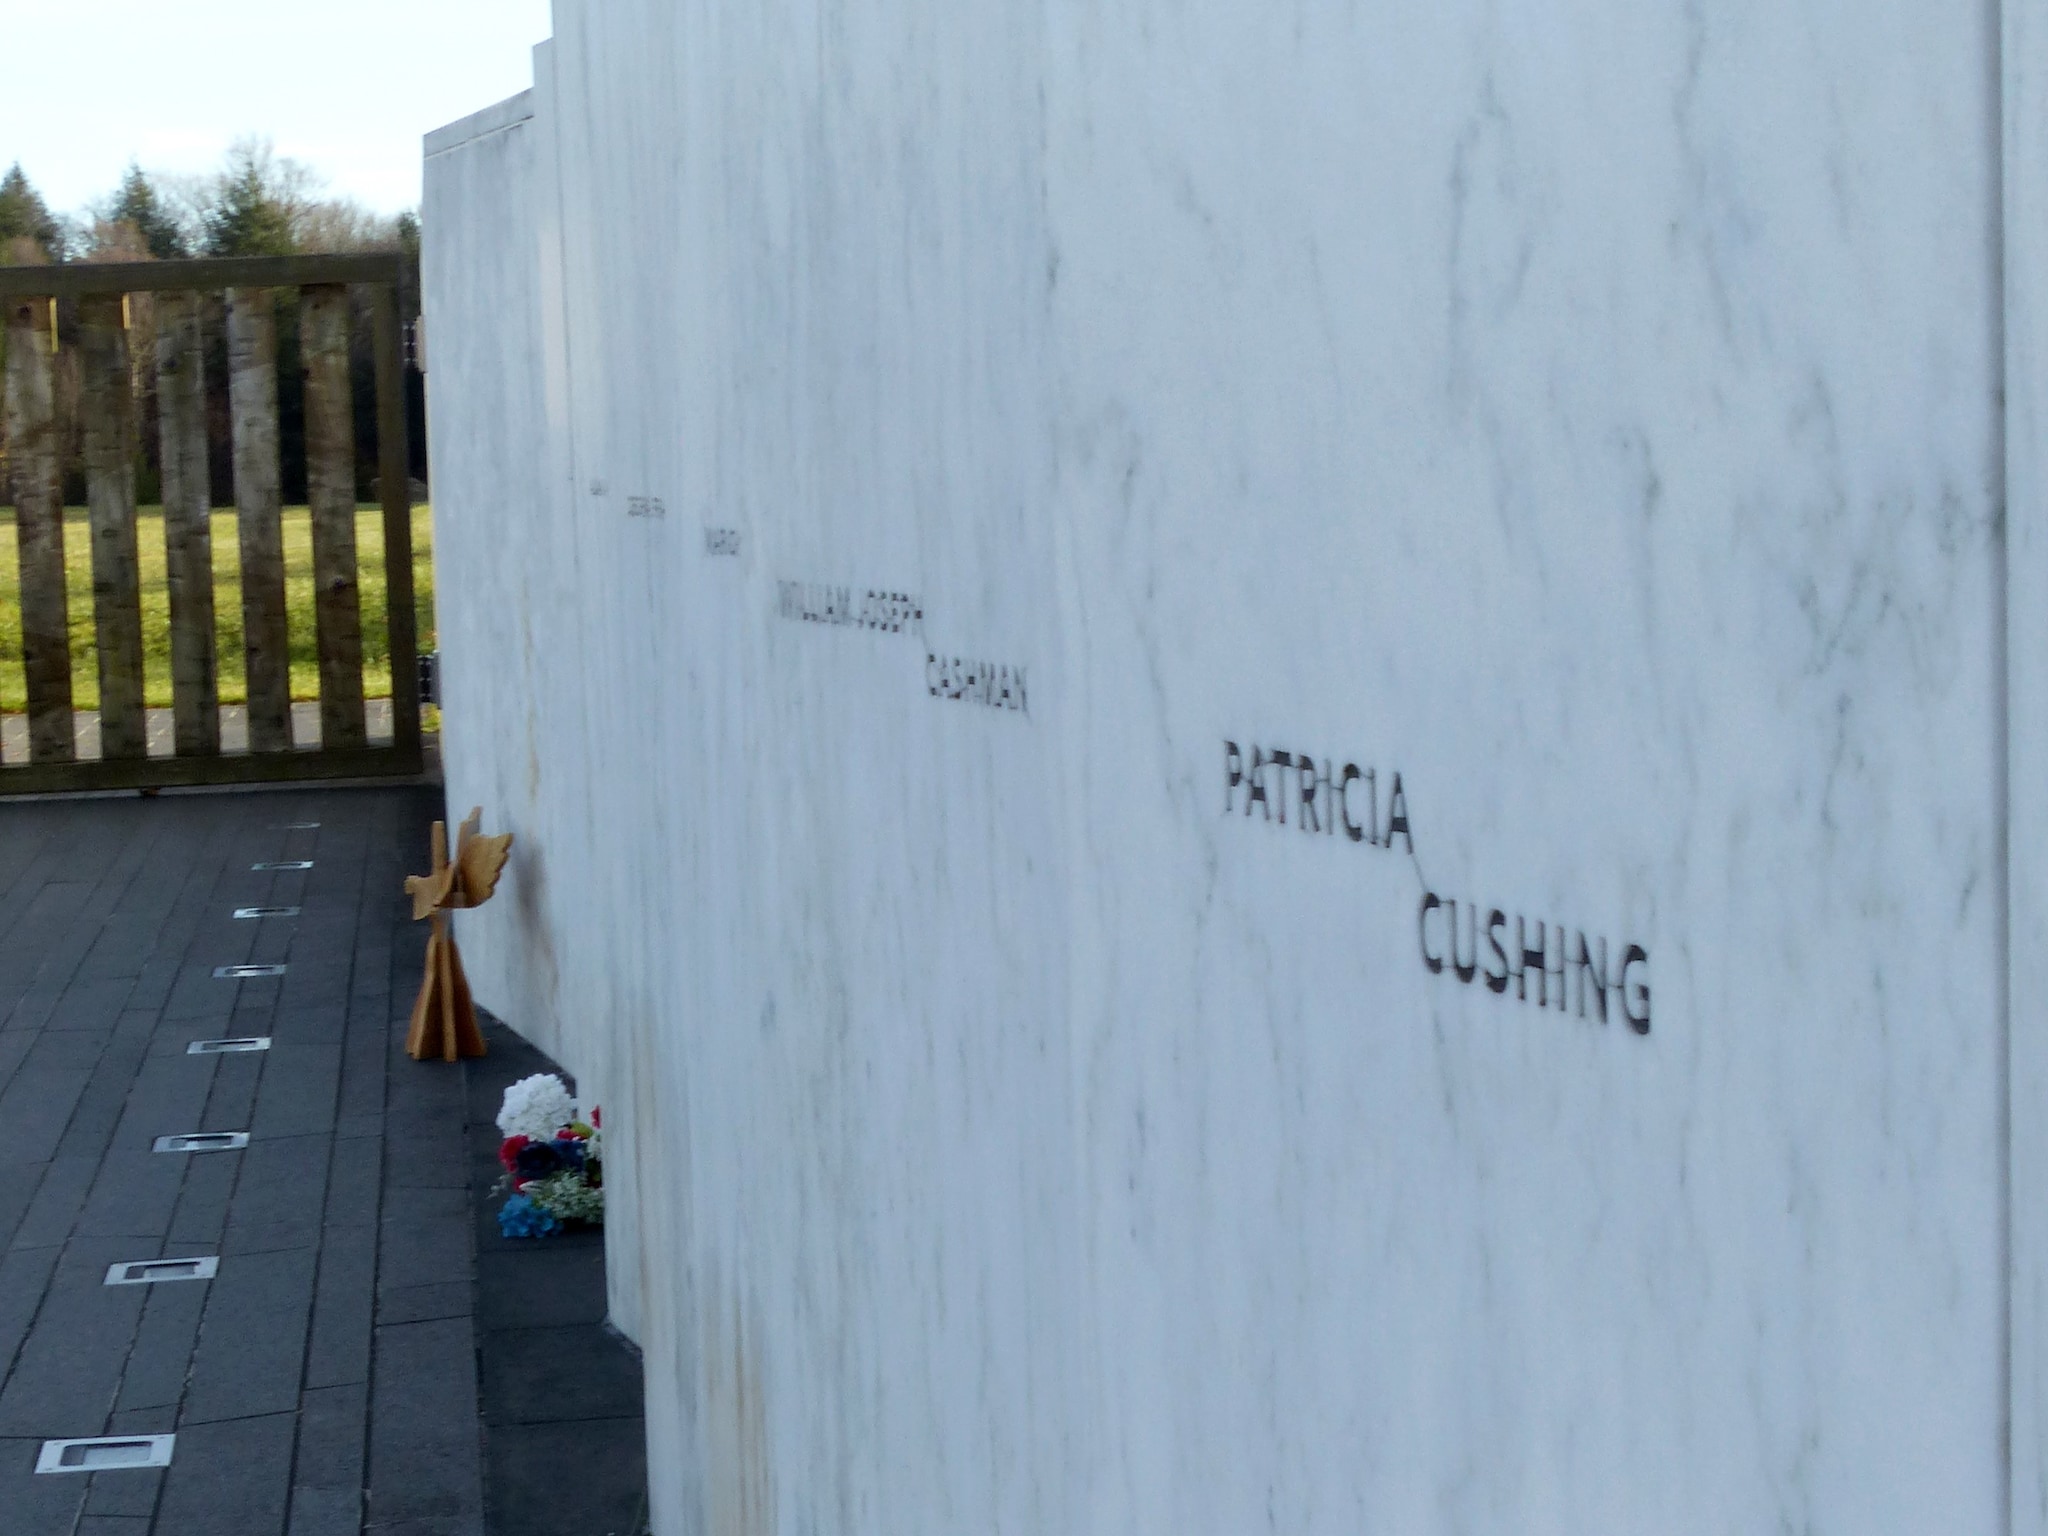 A memorial wall with victim names at the Flight 93 National Memorial. Flowers are placed on the ground in front of it.